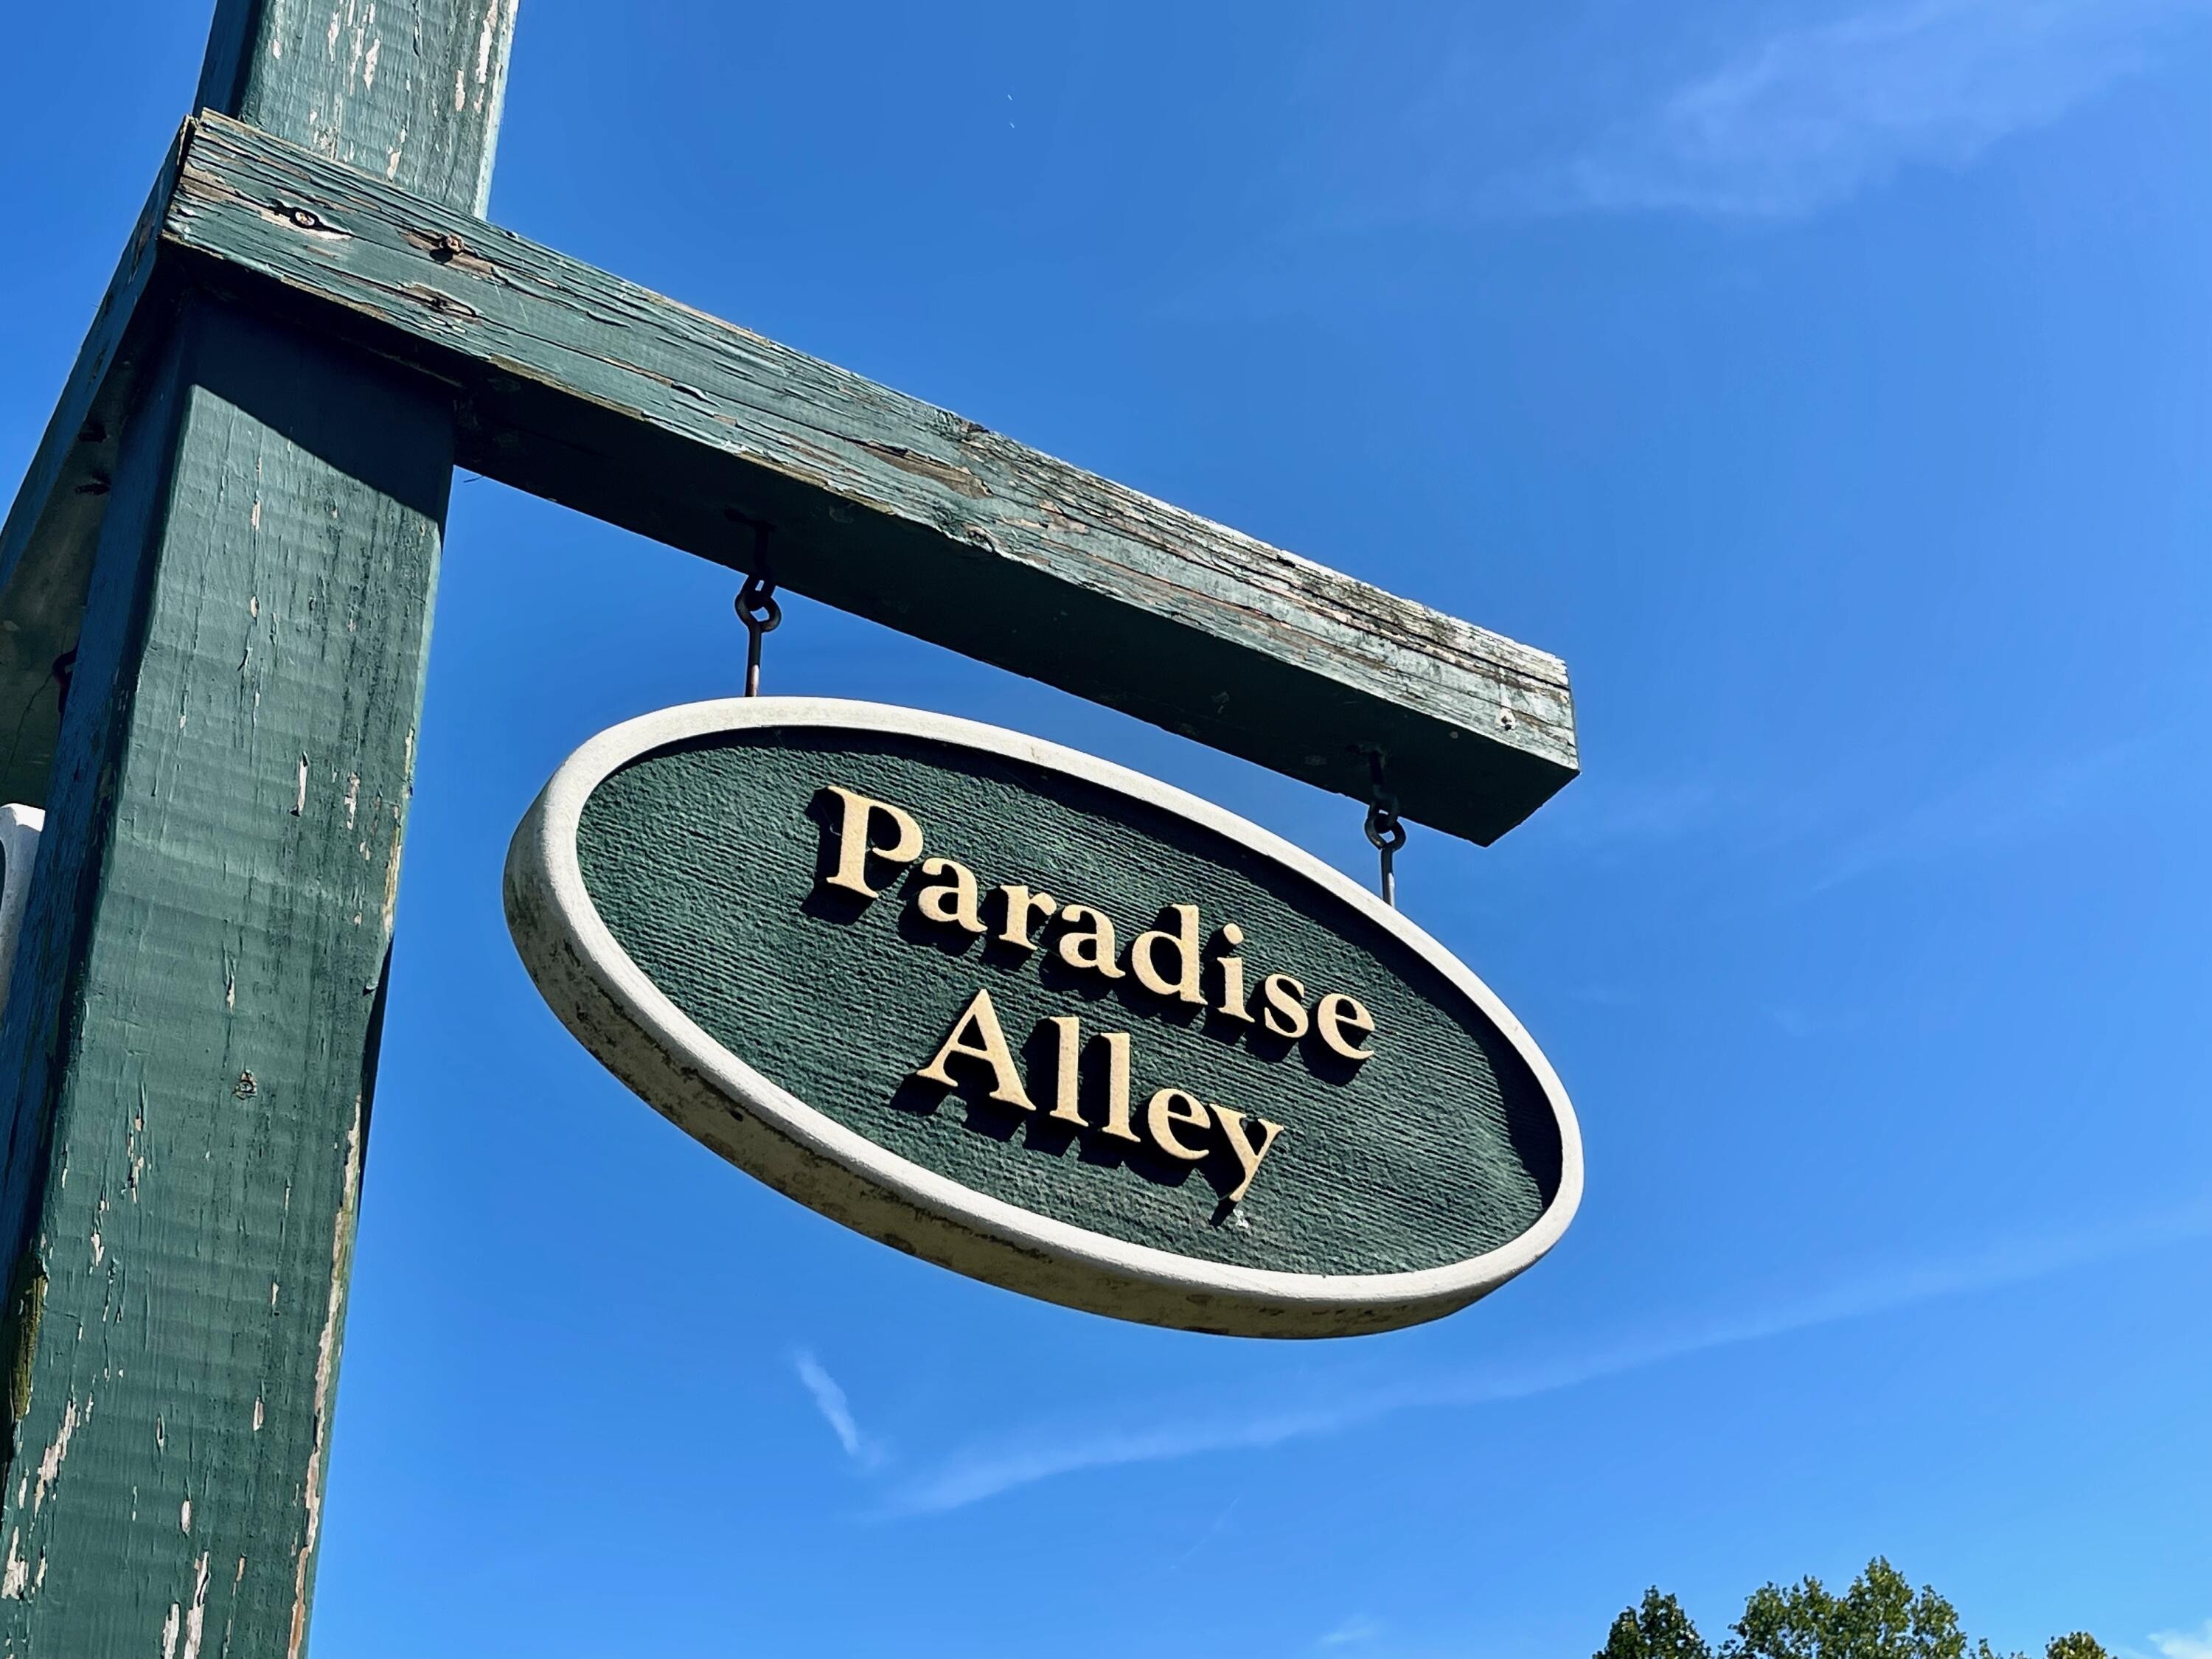 1. 96 Paradise Alley